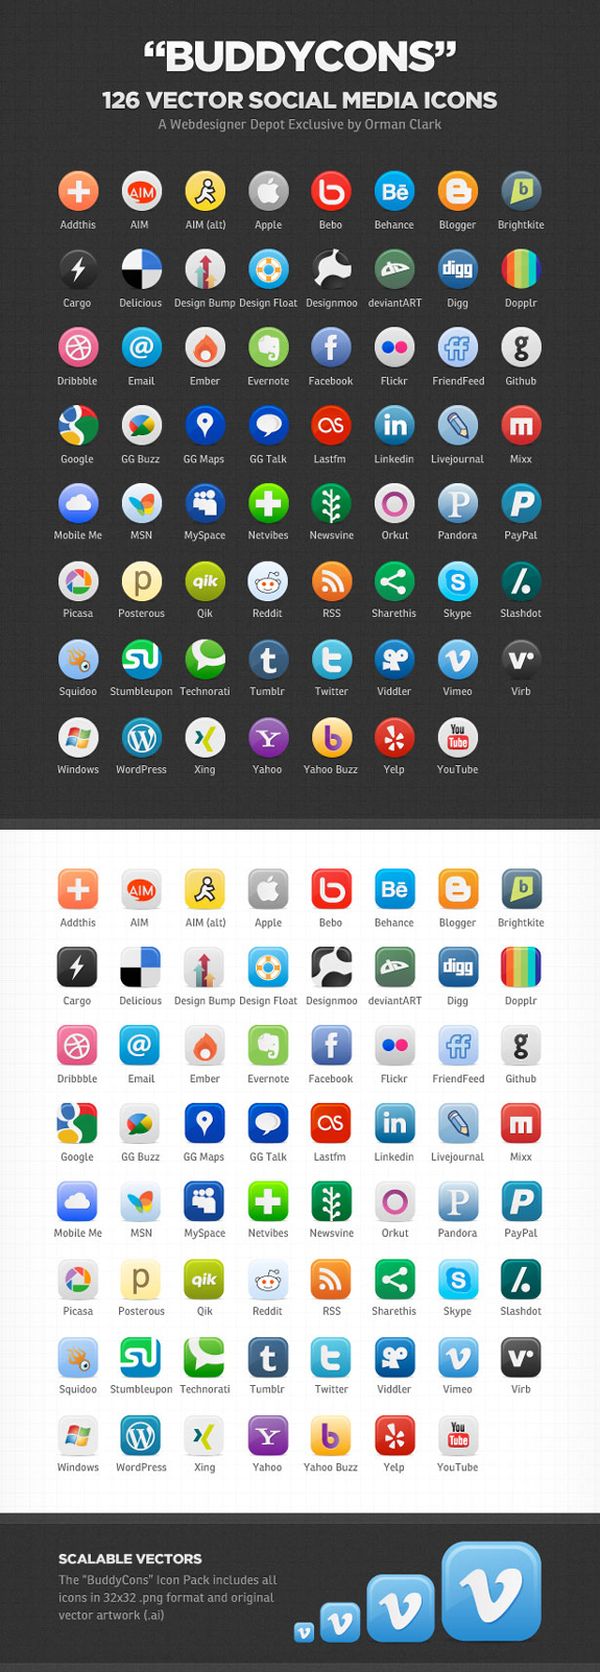 Social networking icons